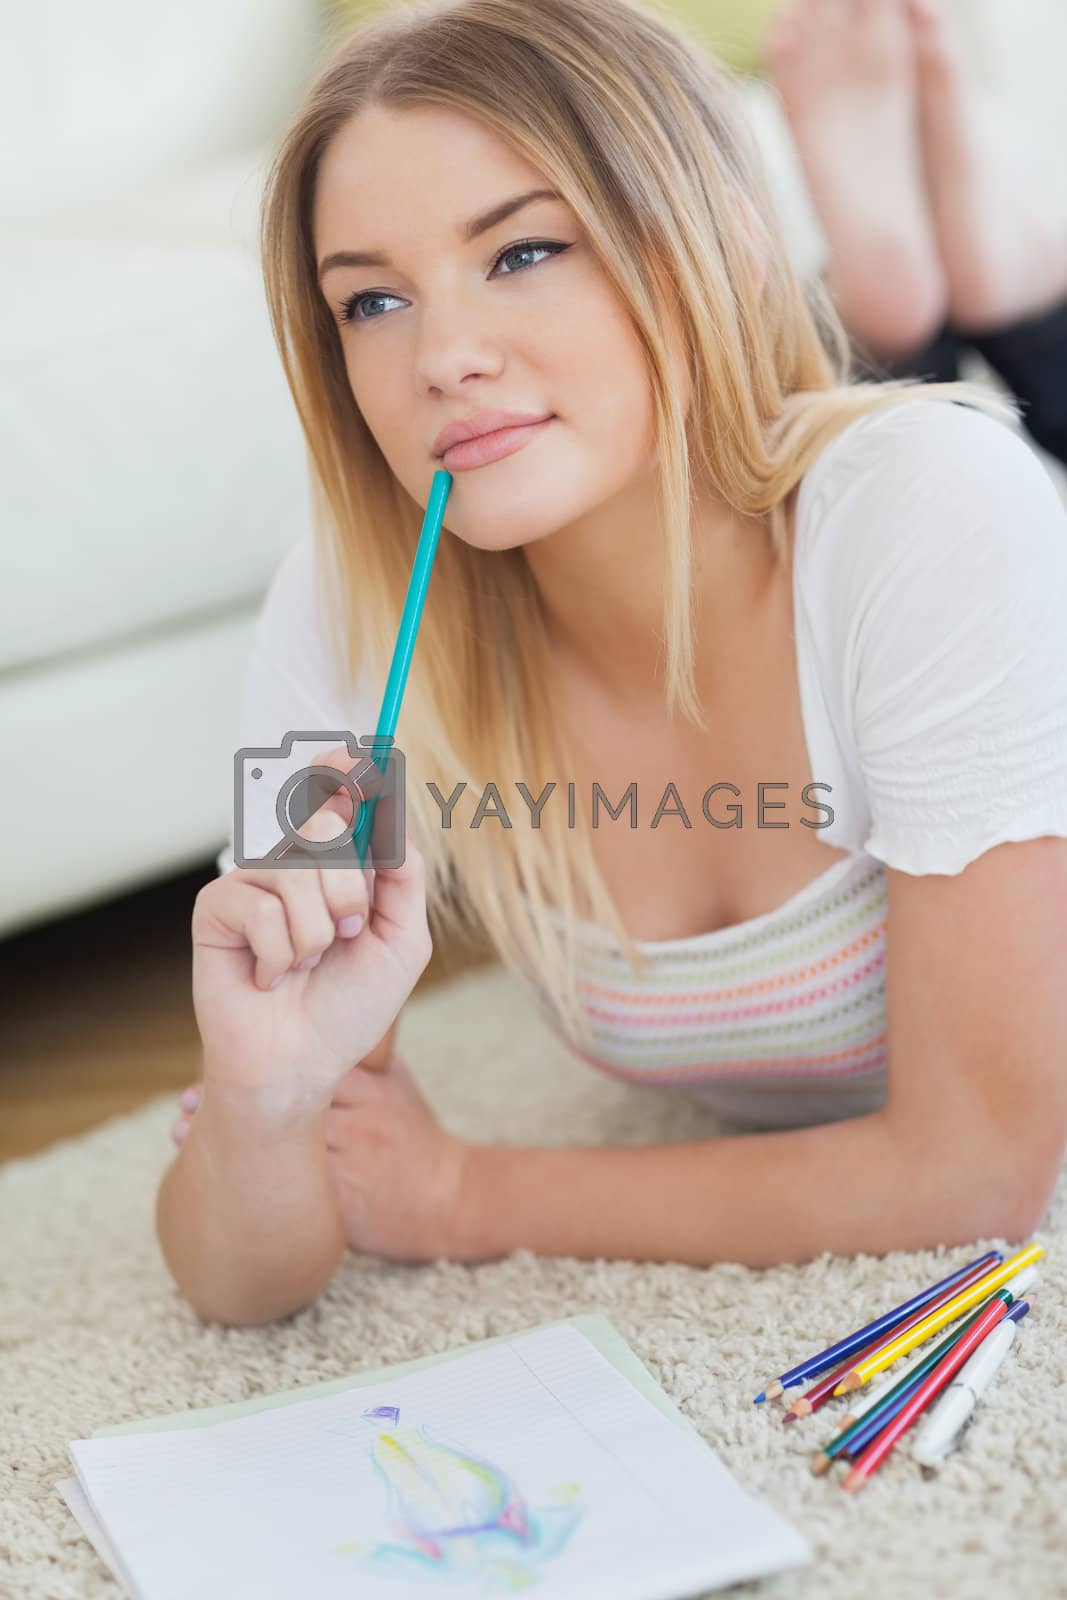 Royalty free image of Thoughtful woman lying on floor looking for inspiration by Wavebreakmedia